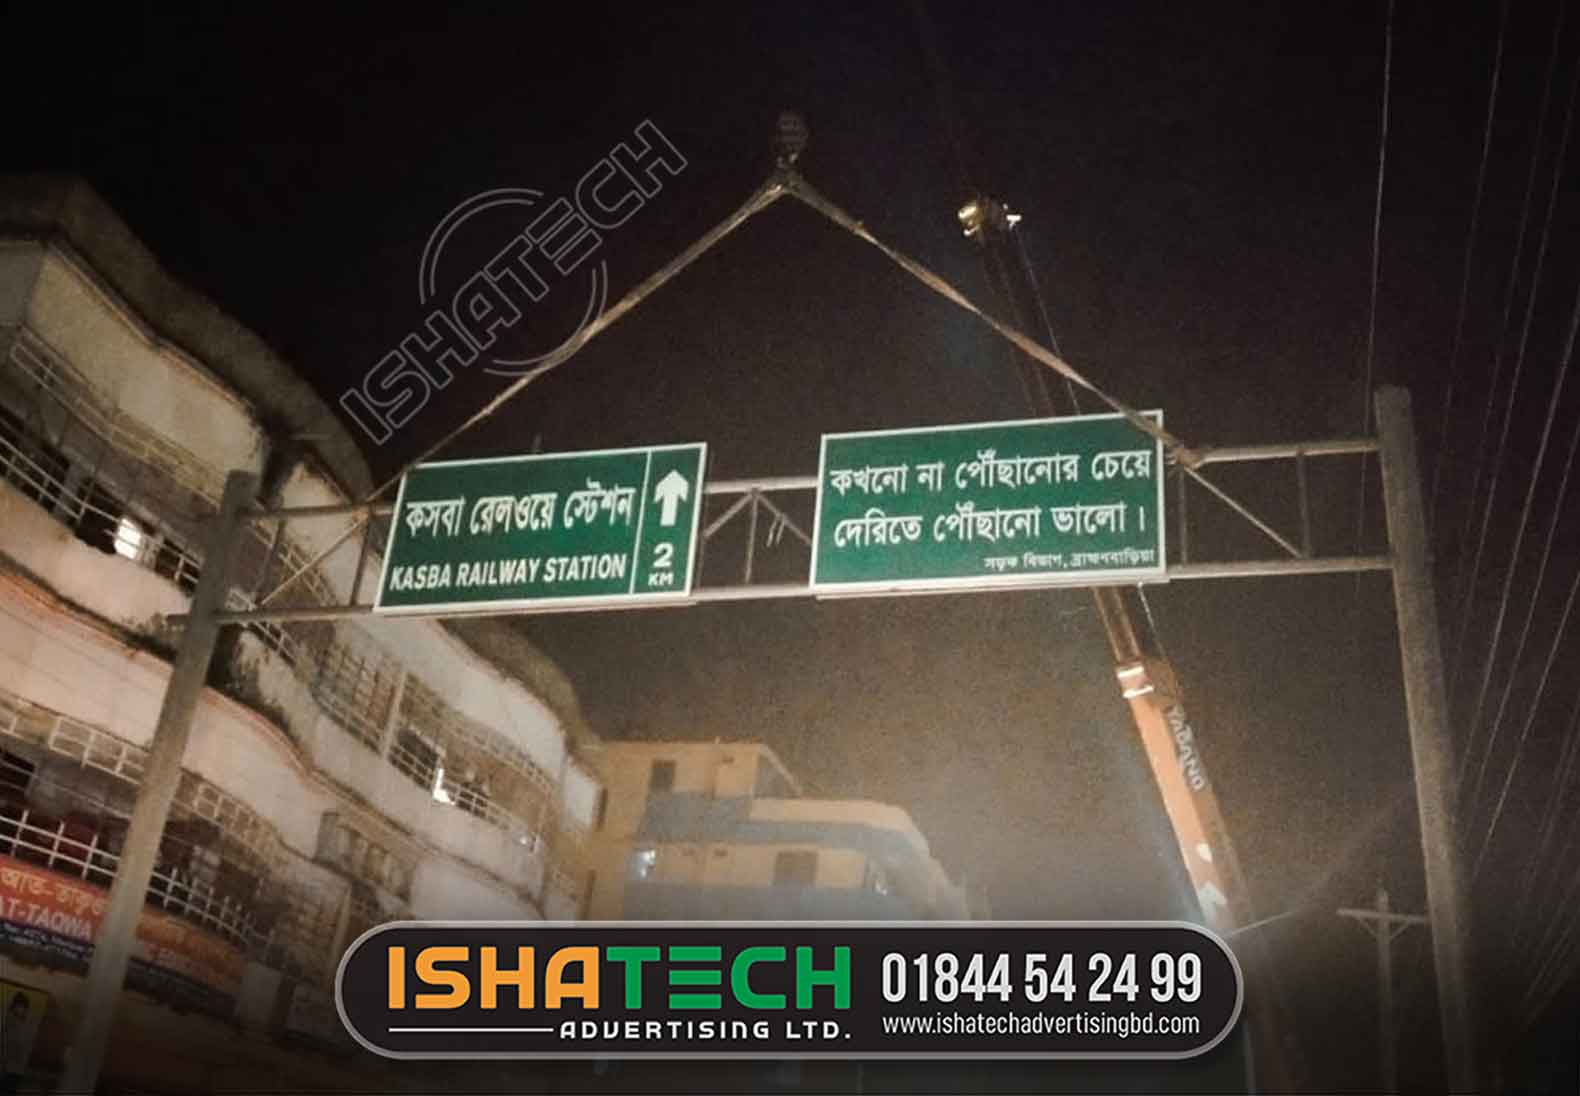 KOSBA RAILWAY STATION DIRECTIONAL BILLBOARD SIGNS IN DHDKA, BD, THE SIGNBOARD IS MAKING BY ISHATECH ADVERTISING LTD